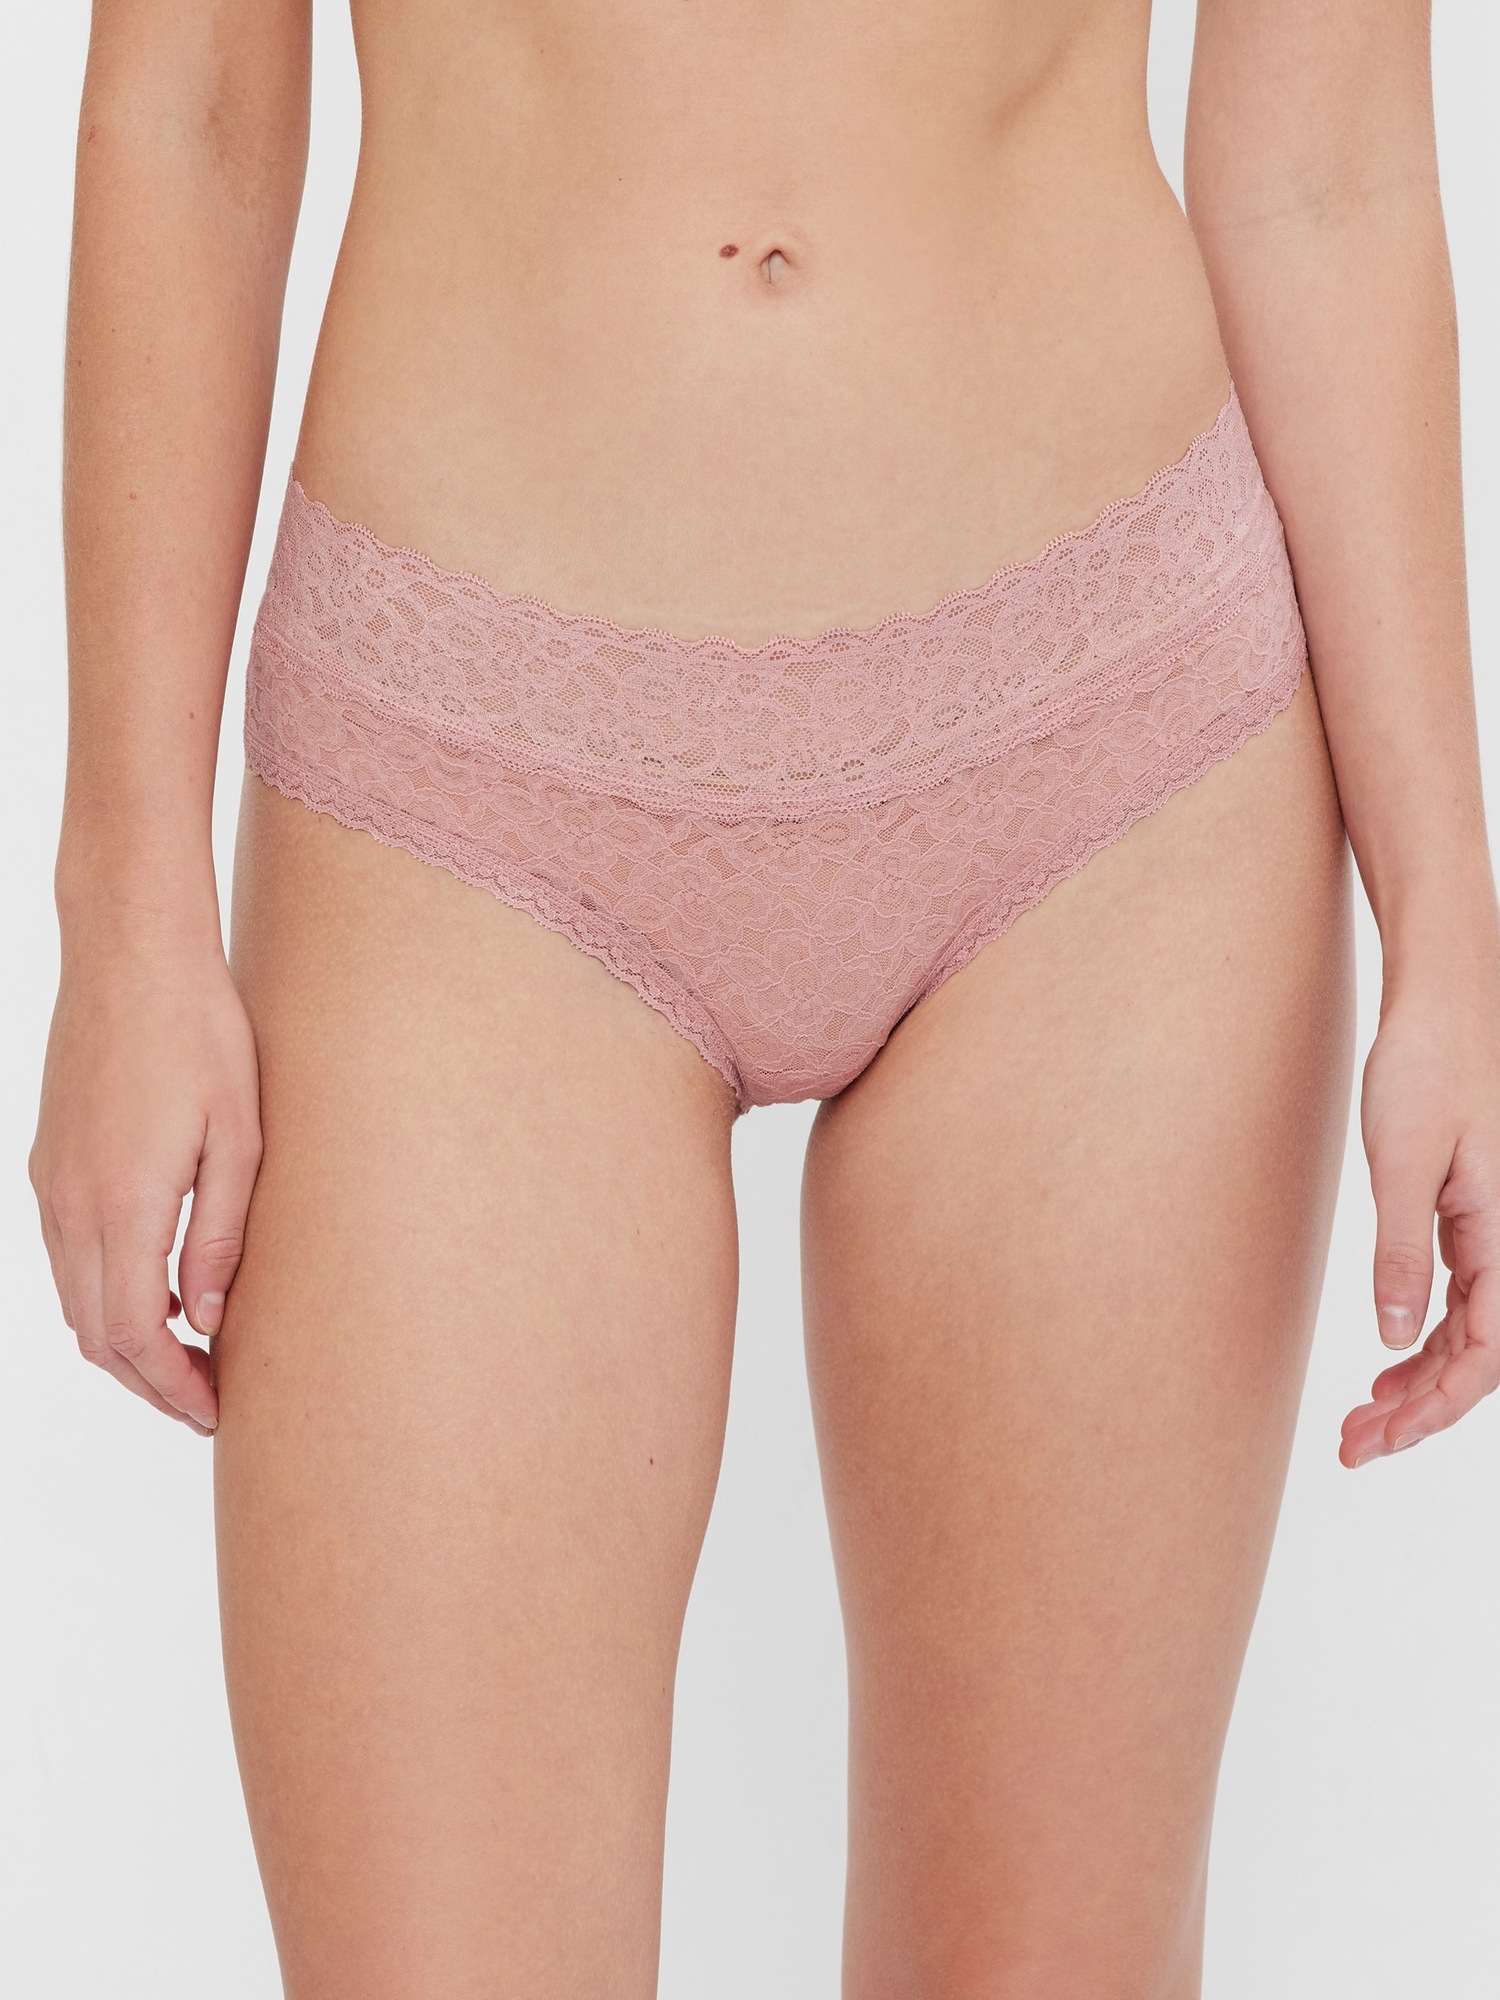 Buy Lace-Trim Cheeky Panty Online